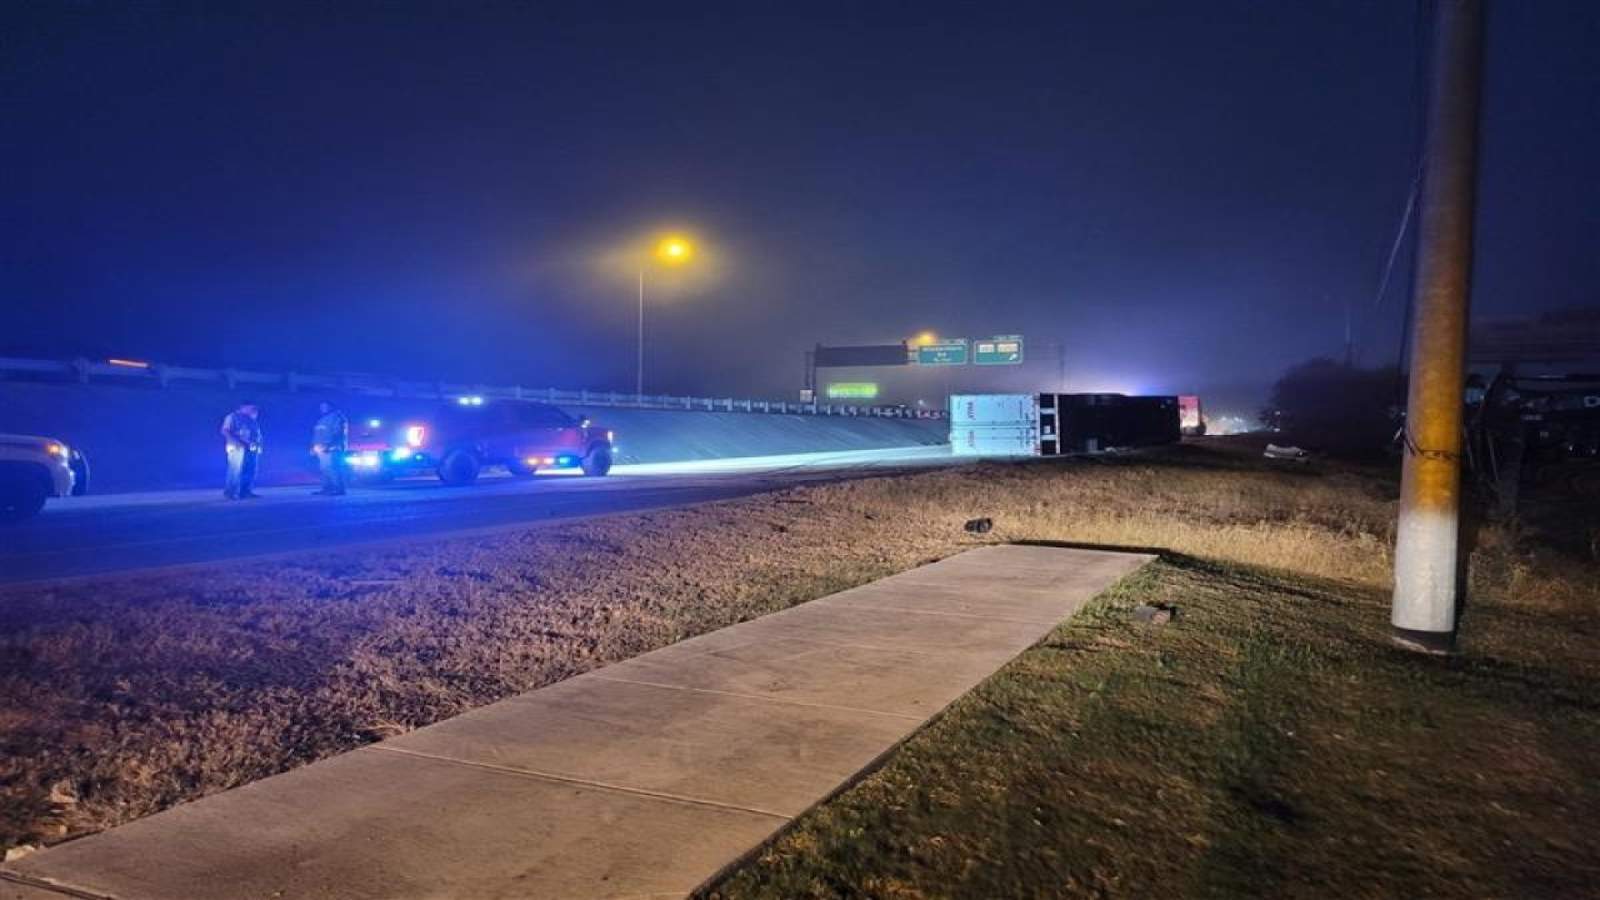 18-wheeler carrying FedEx packages crashes on I-35 in Schertz, police say